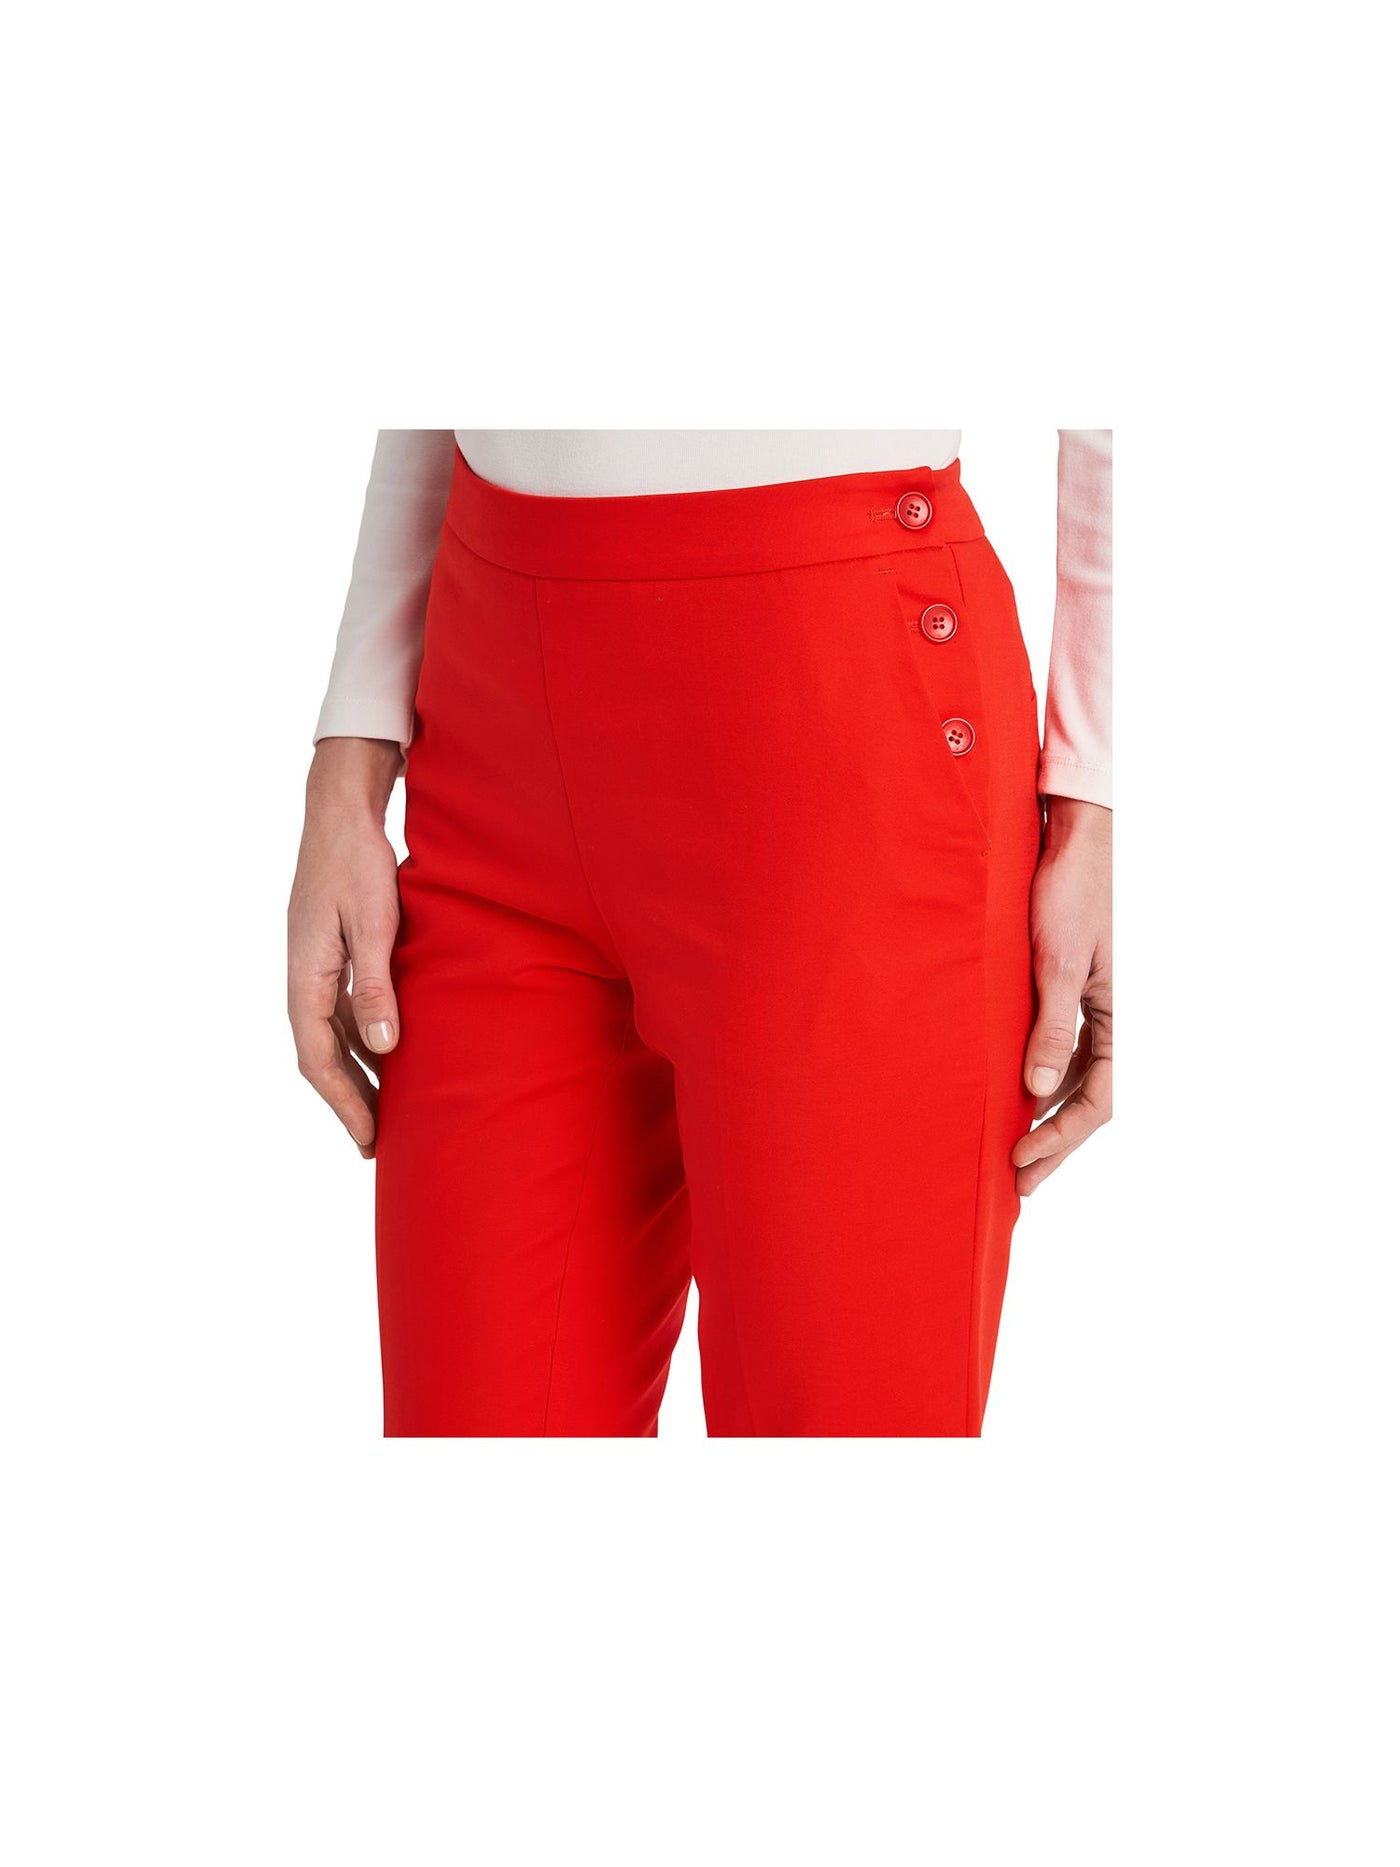 RILEY&RAE Womens Red Stretch Pocketed Button Closure Side Seam Straight leg Pants 2